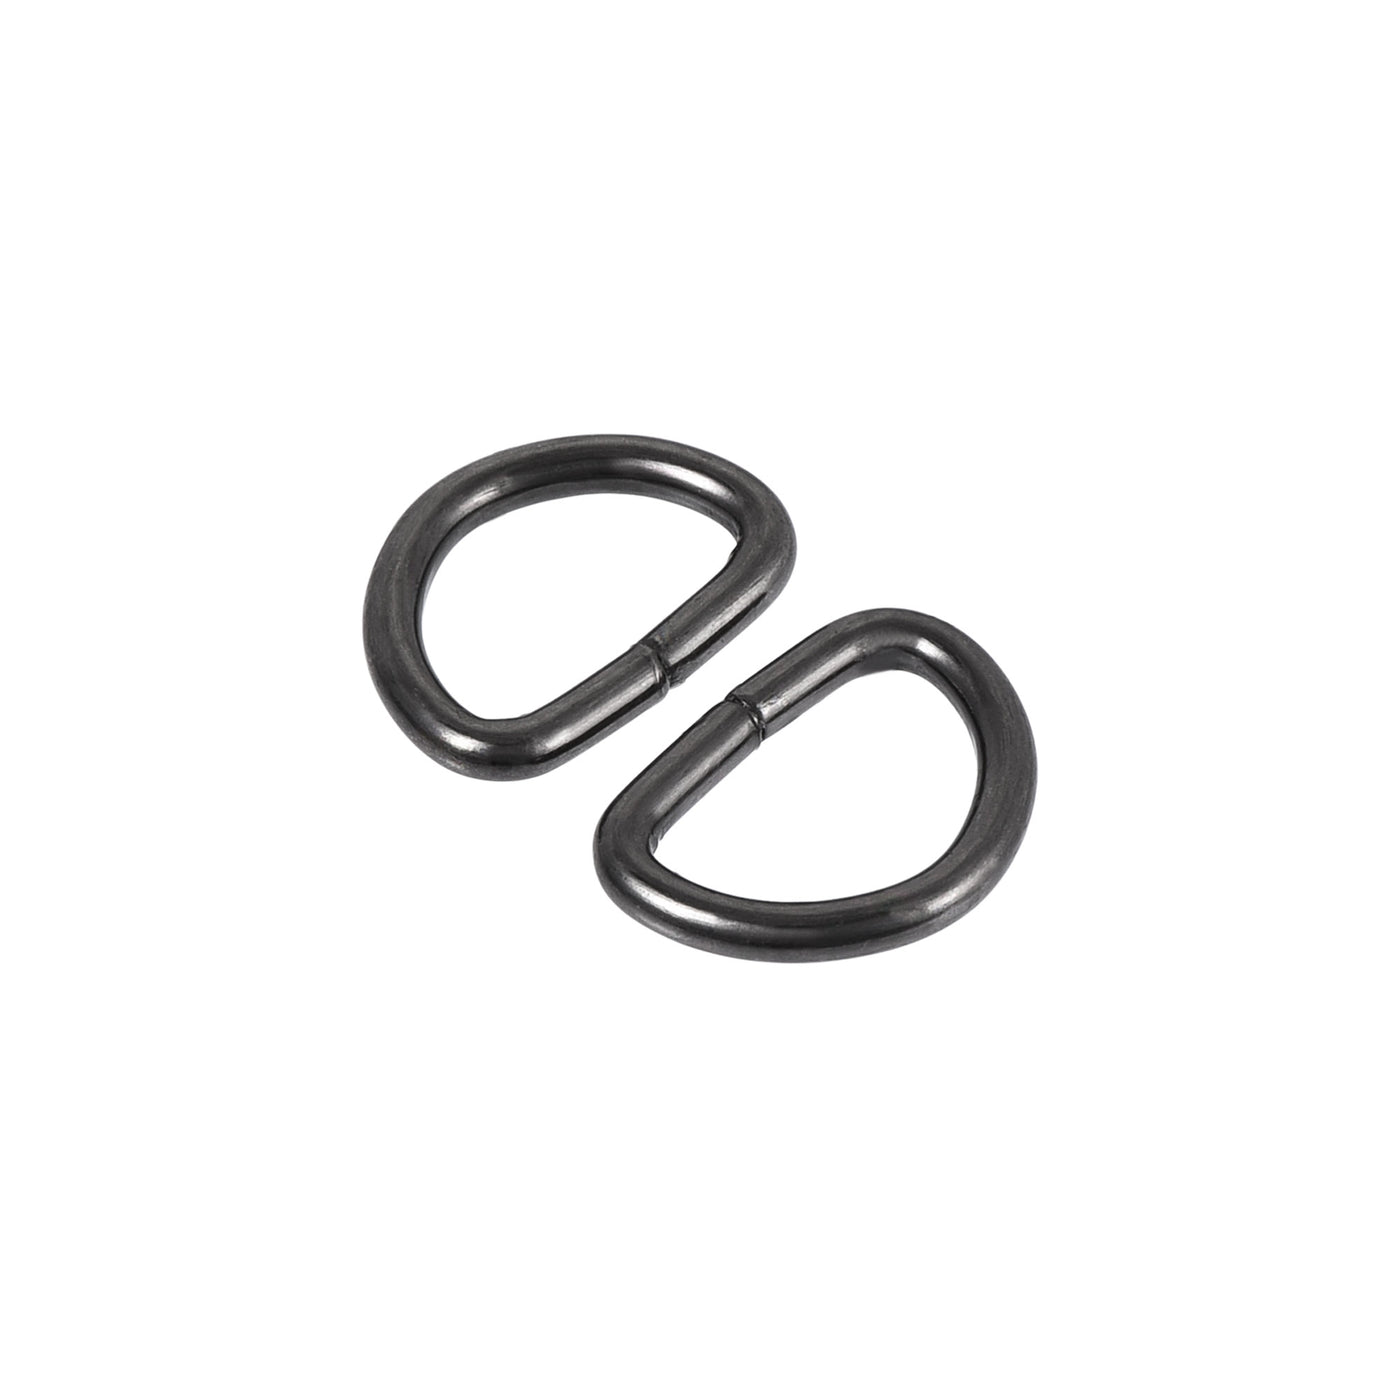 uxcell Uxcell Metal D Ring 0.39"(10mm) D-Rings Buckle for Hardware Bags Belts Craft DIY Accessories Black 150pcs